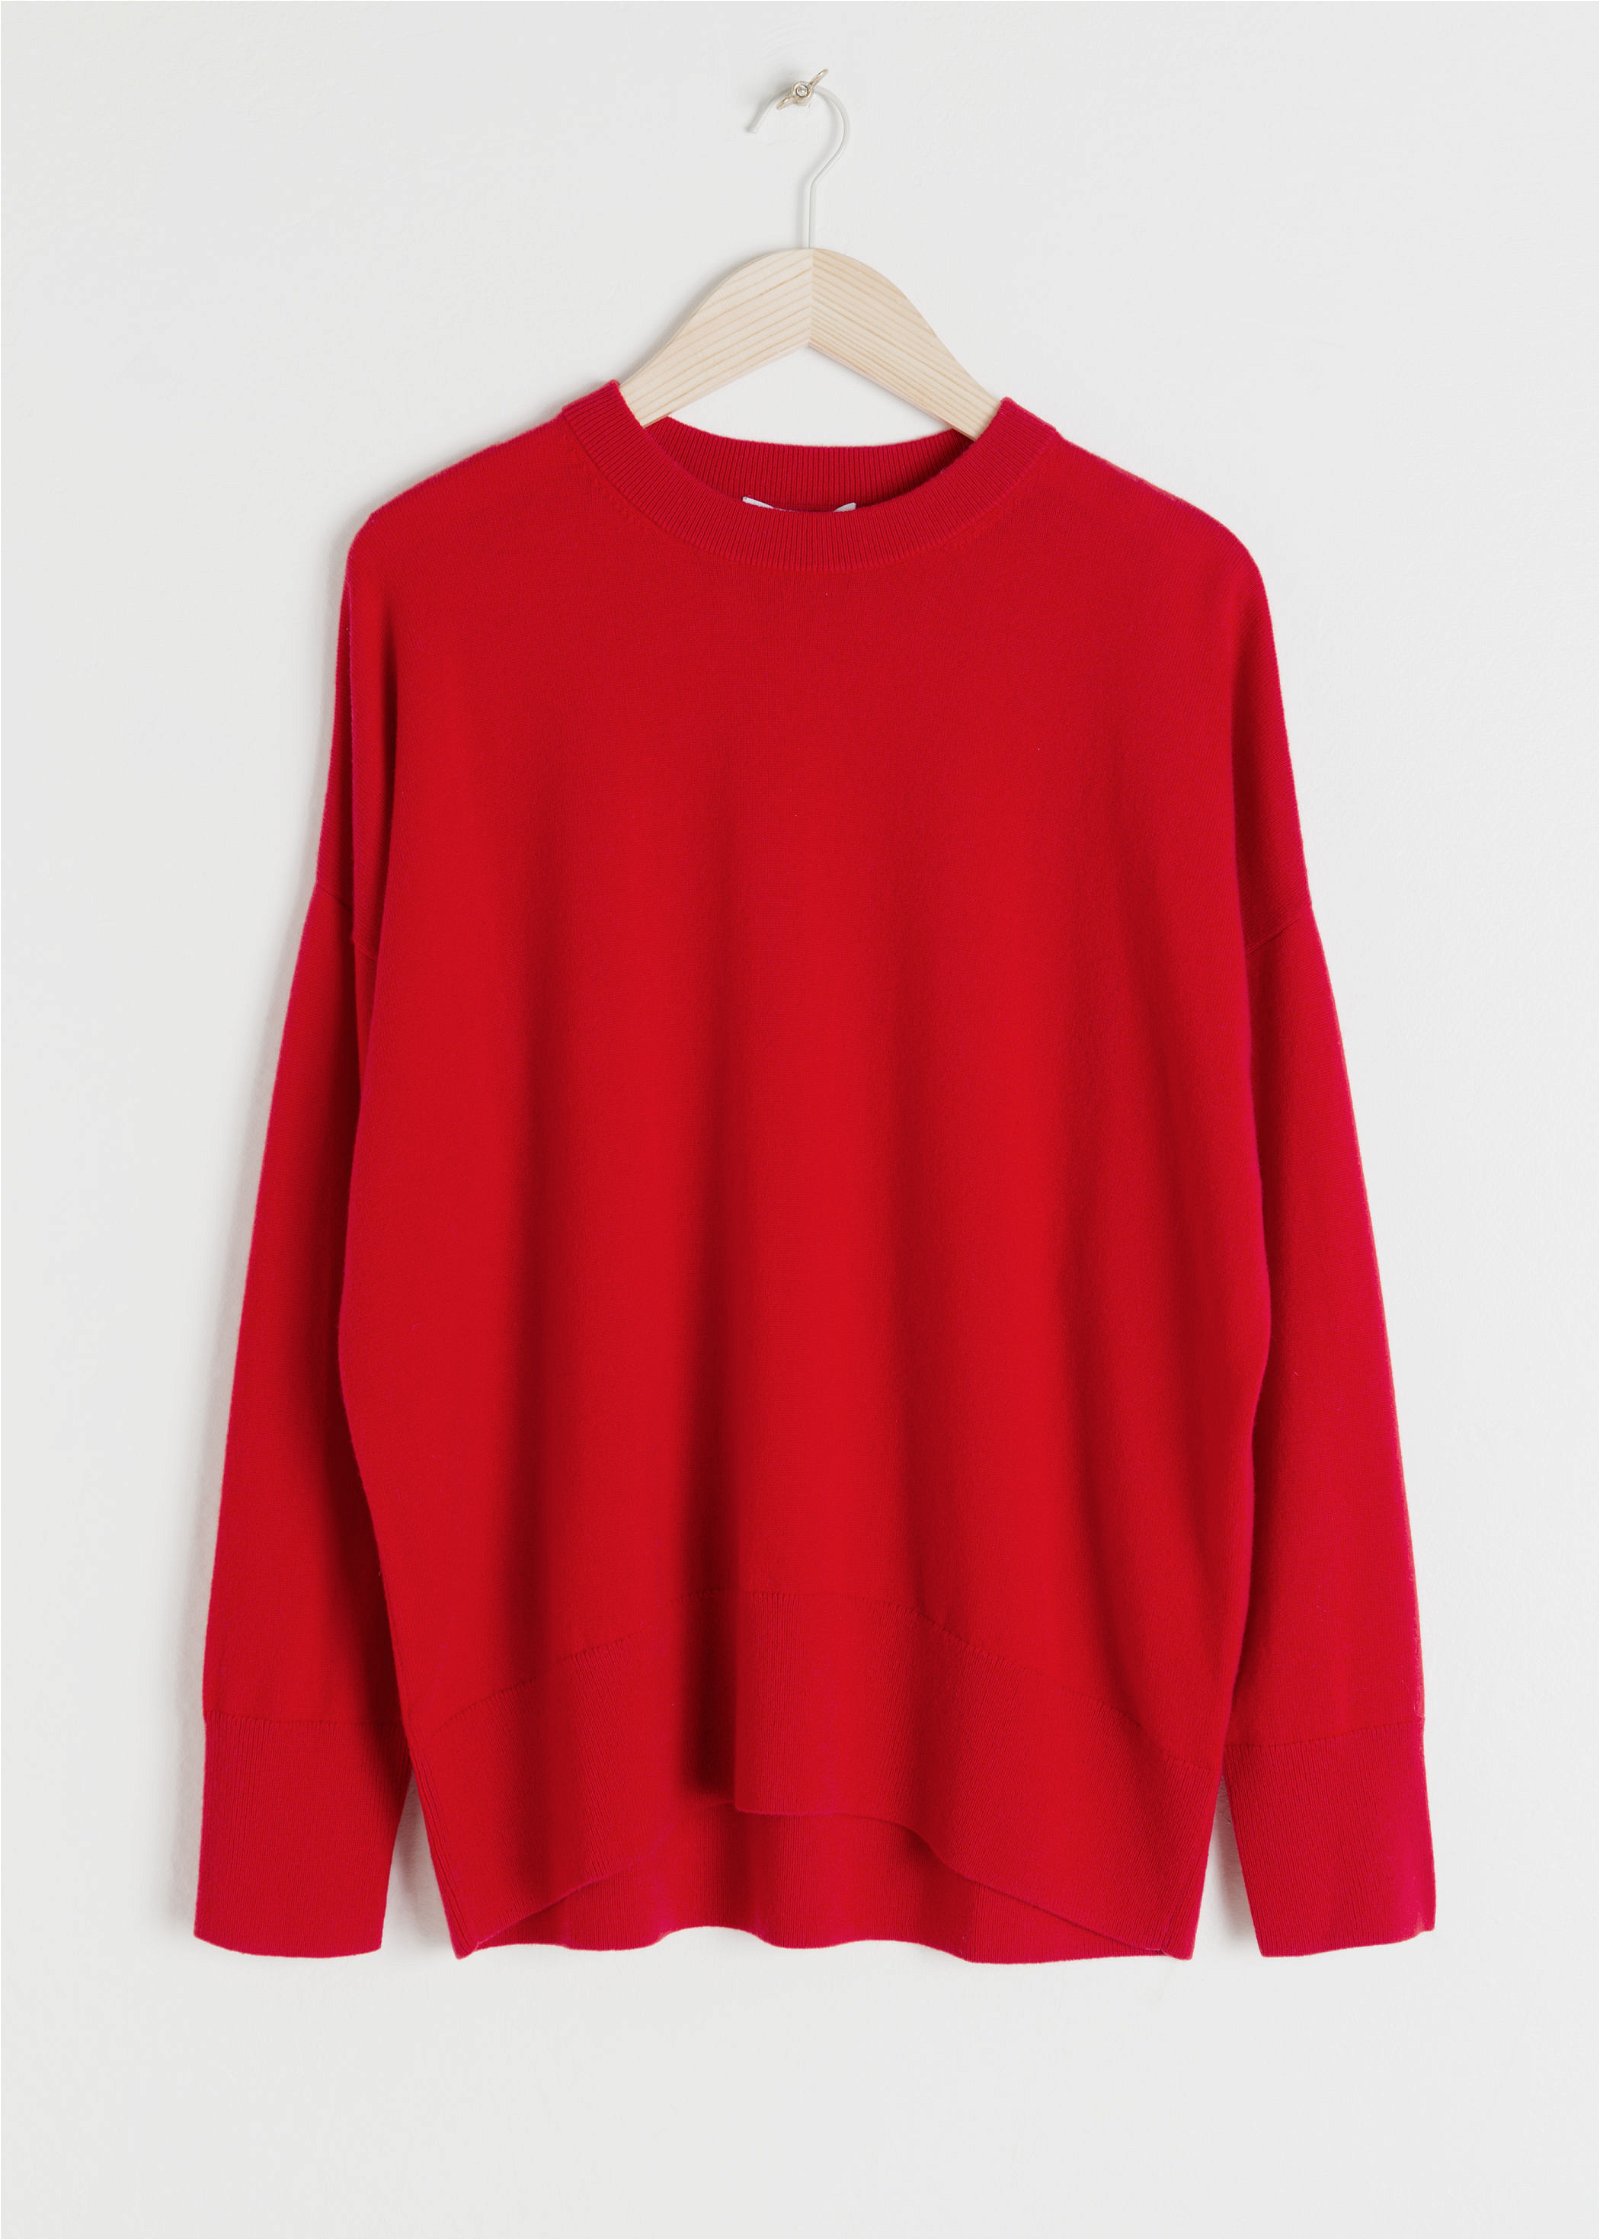 & OTHER STORIES Cashmere Sweater | Endource